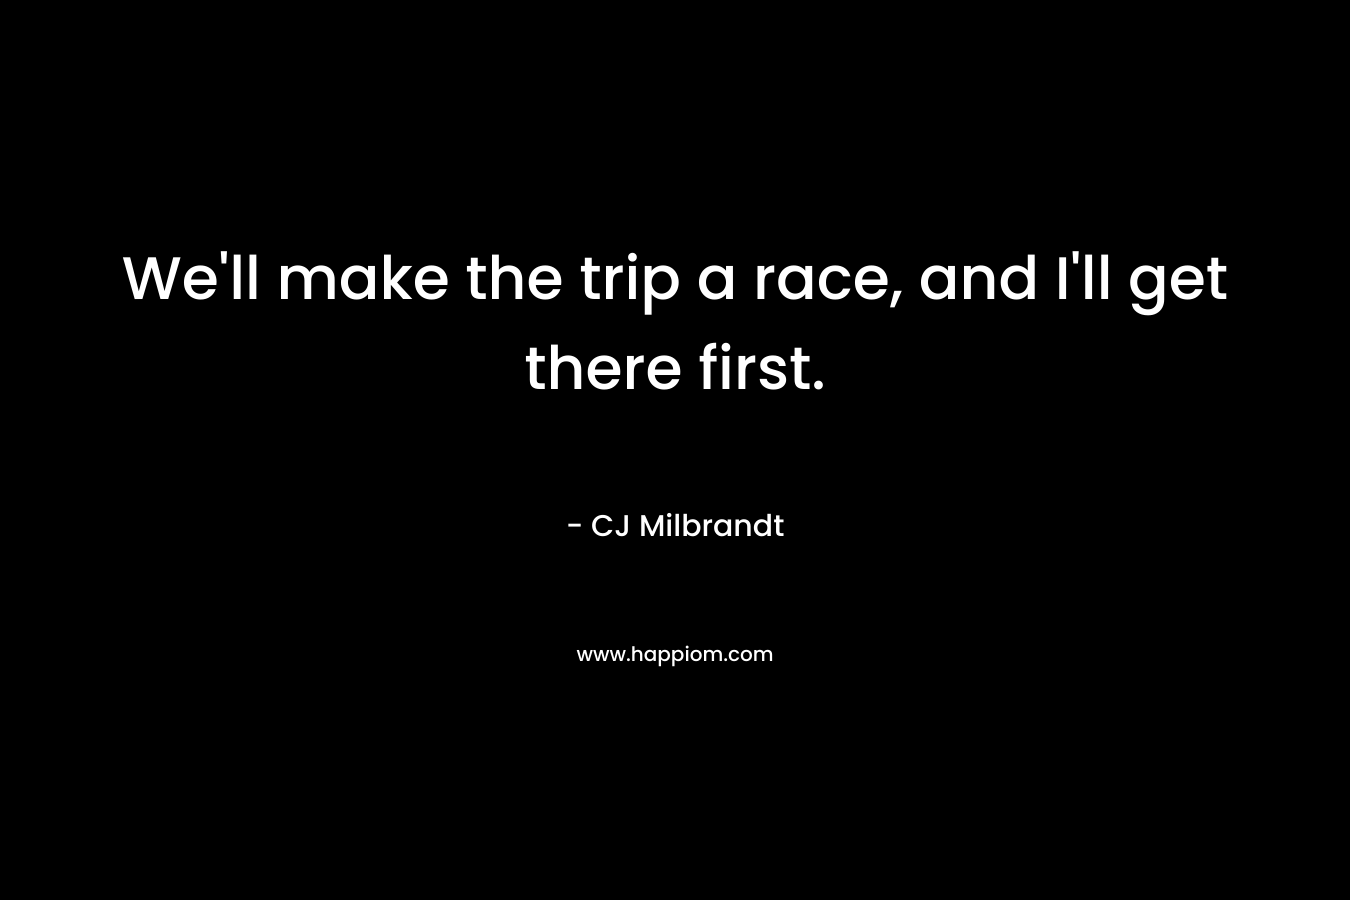 We'll make the trip a race, and I'll get there first.